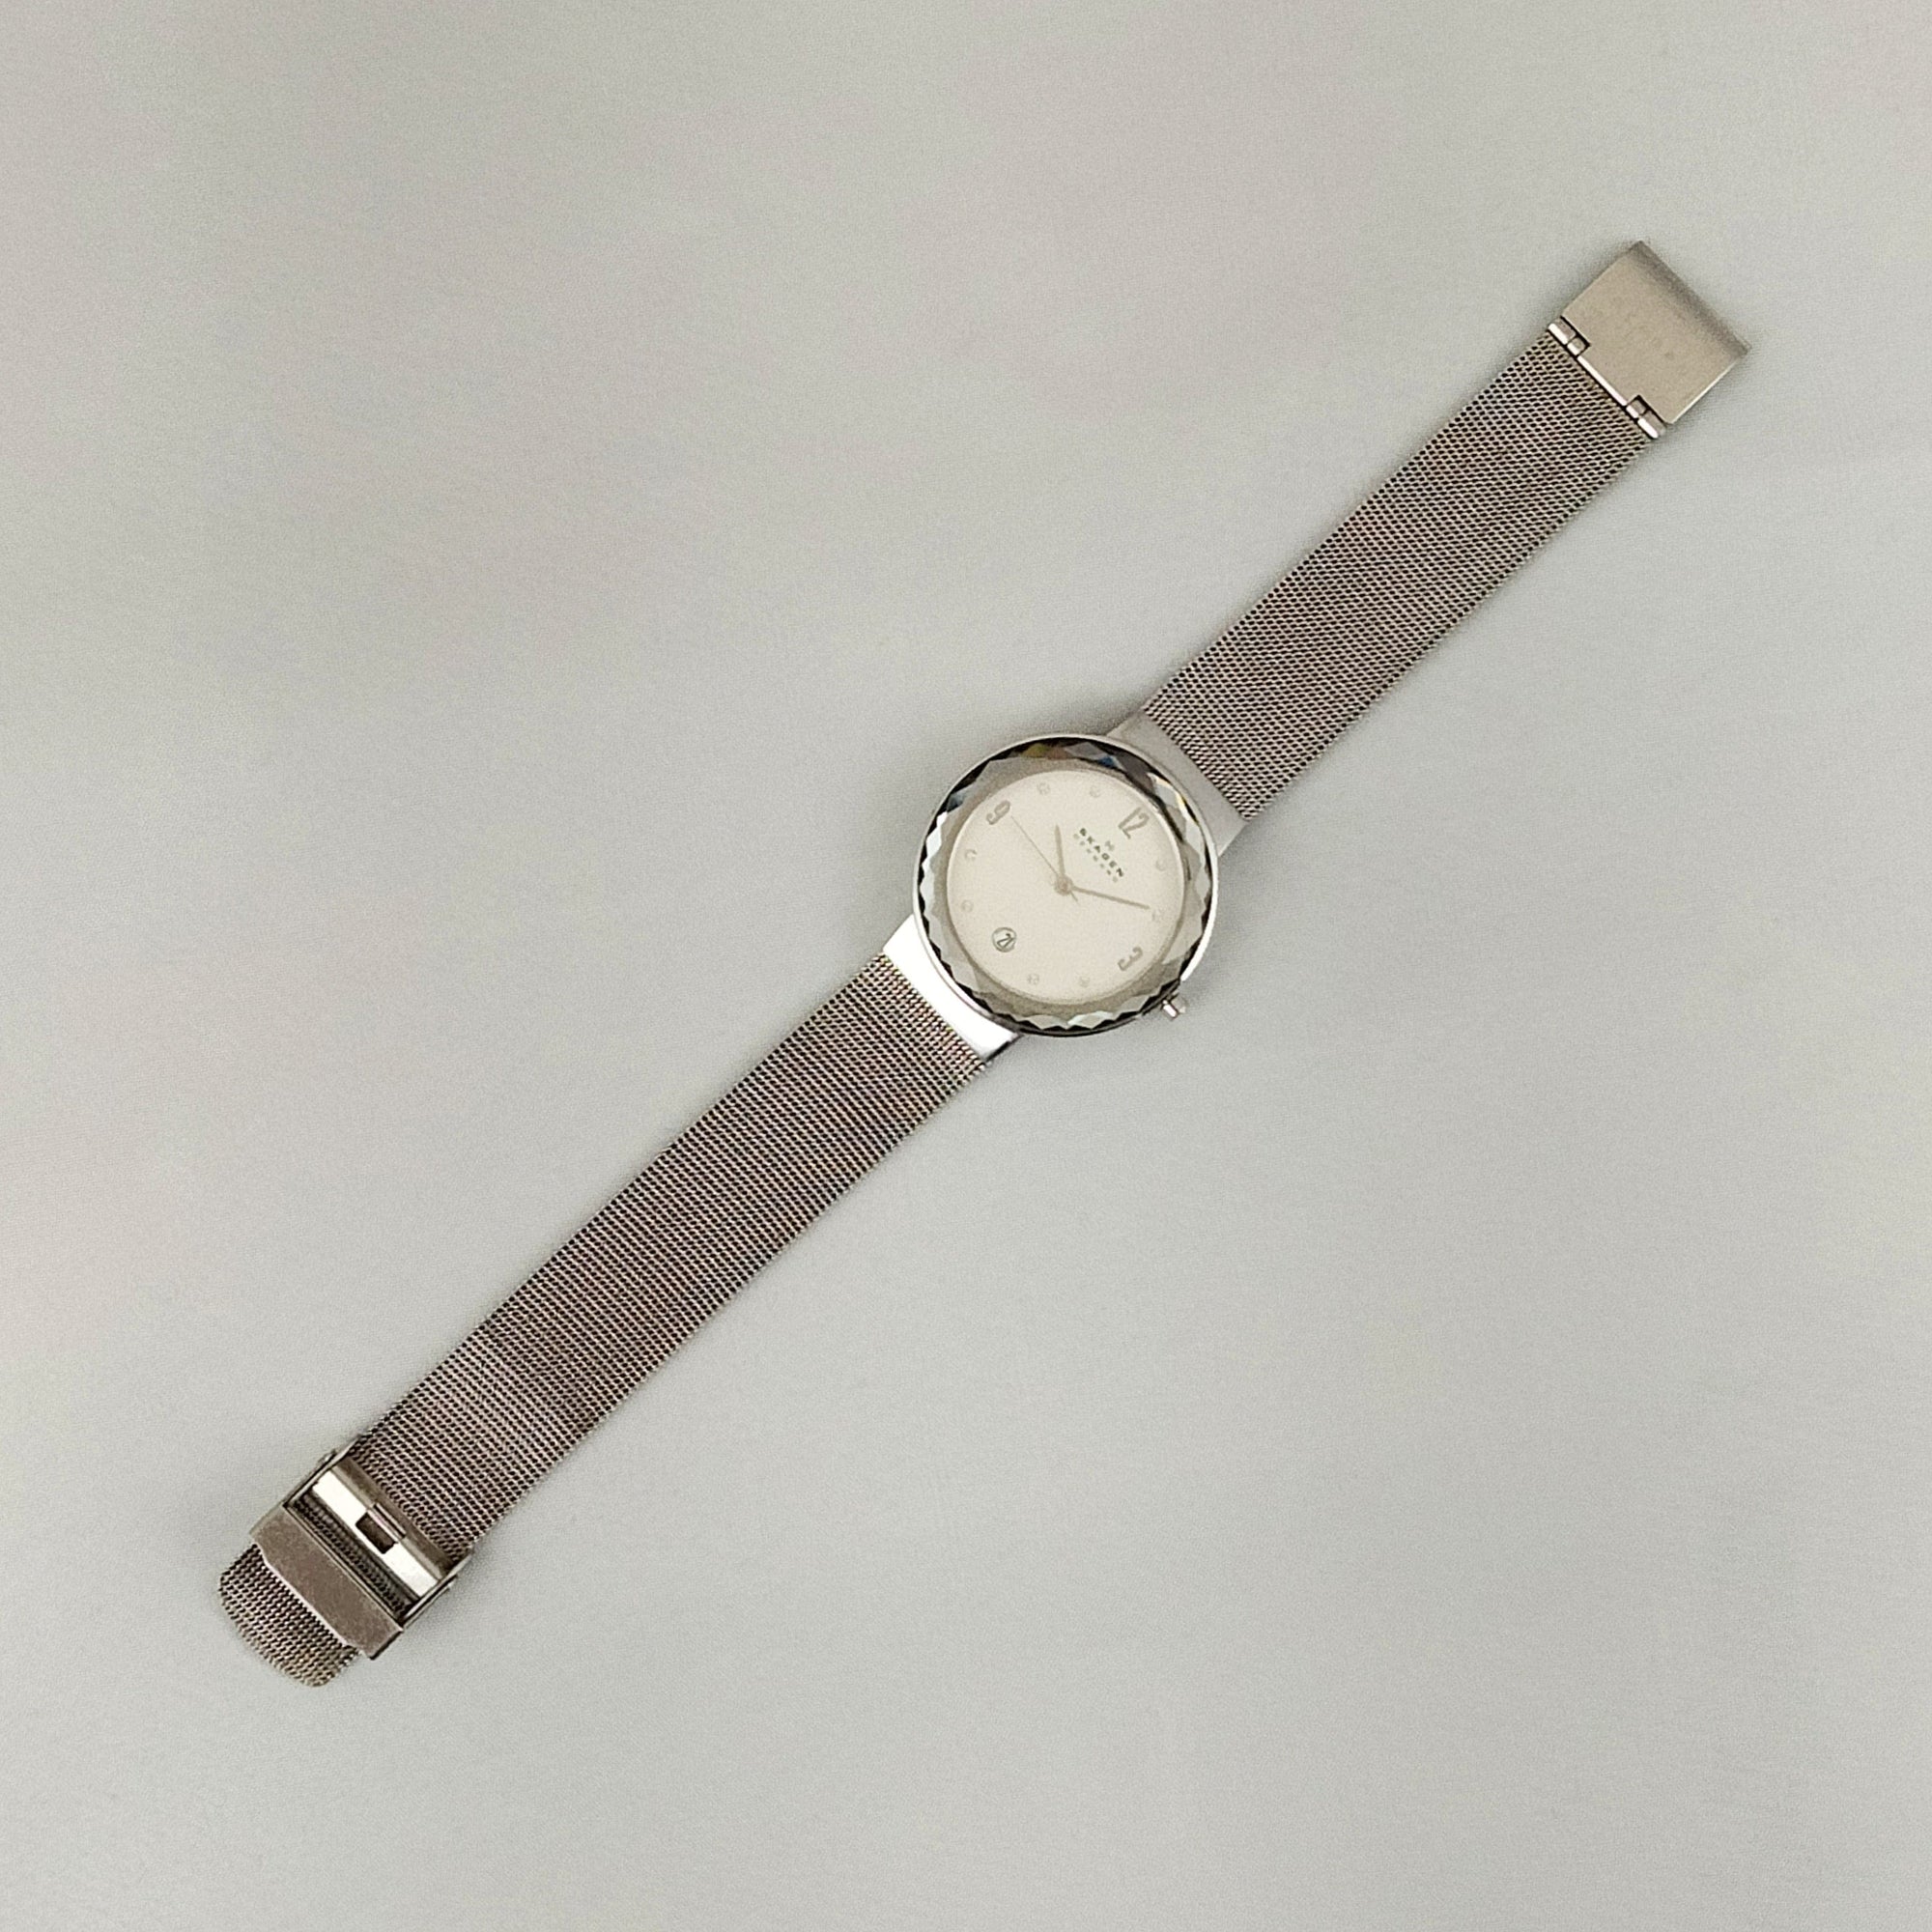 I Like Mikes Mid Century Modern Watches Skagen Unisex Stainless Steel Watch, Jewel Hour Markers, Faceted Face Frame, Mesh Strap